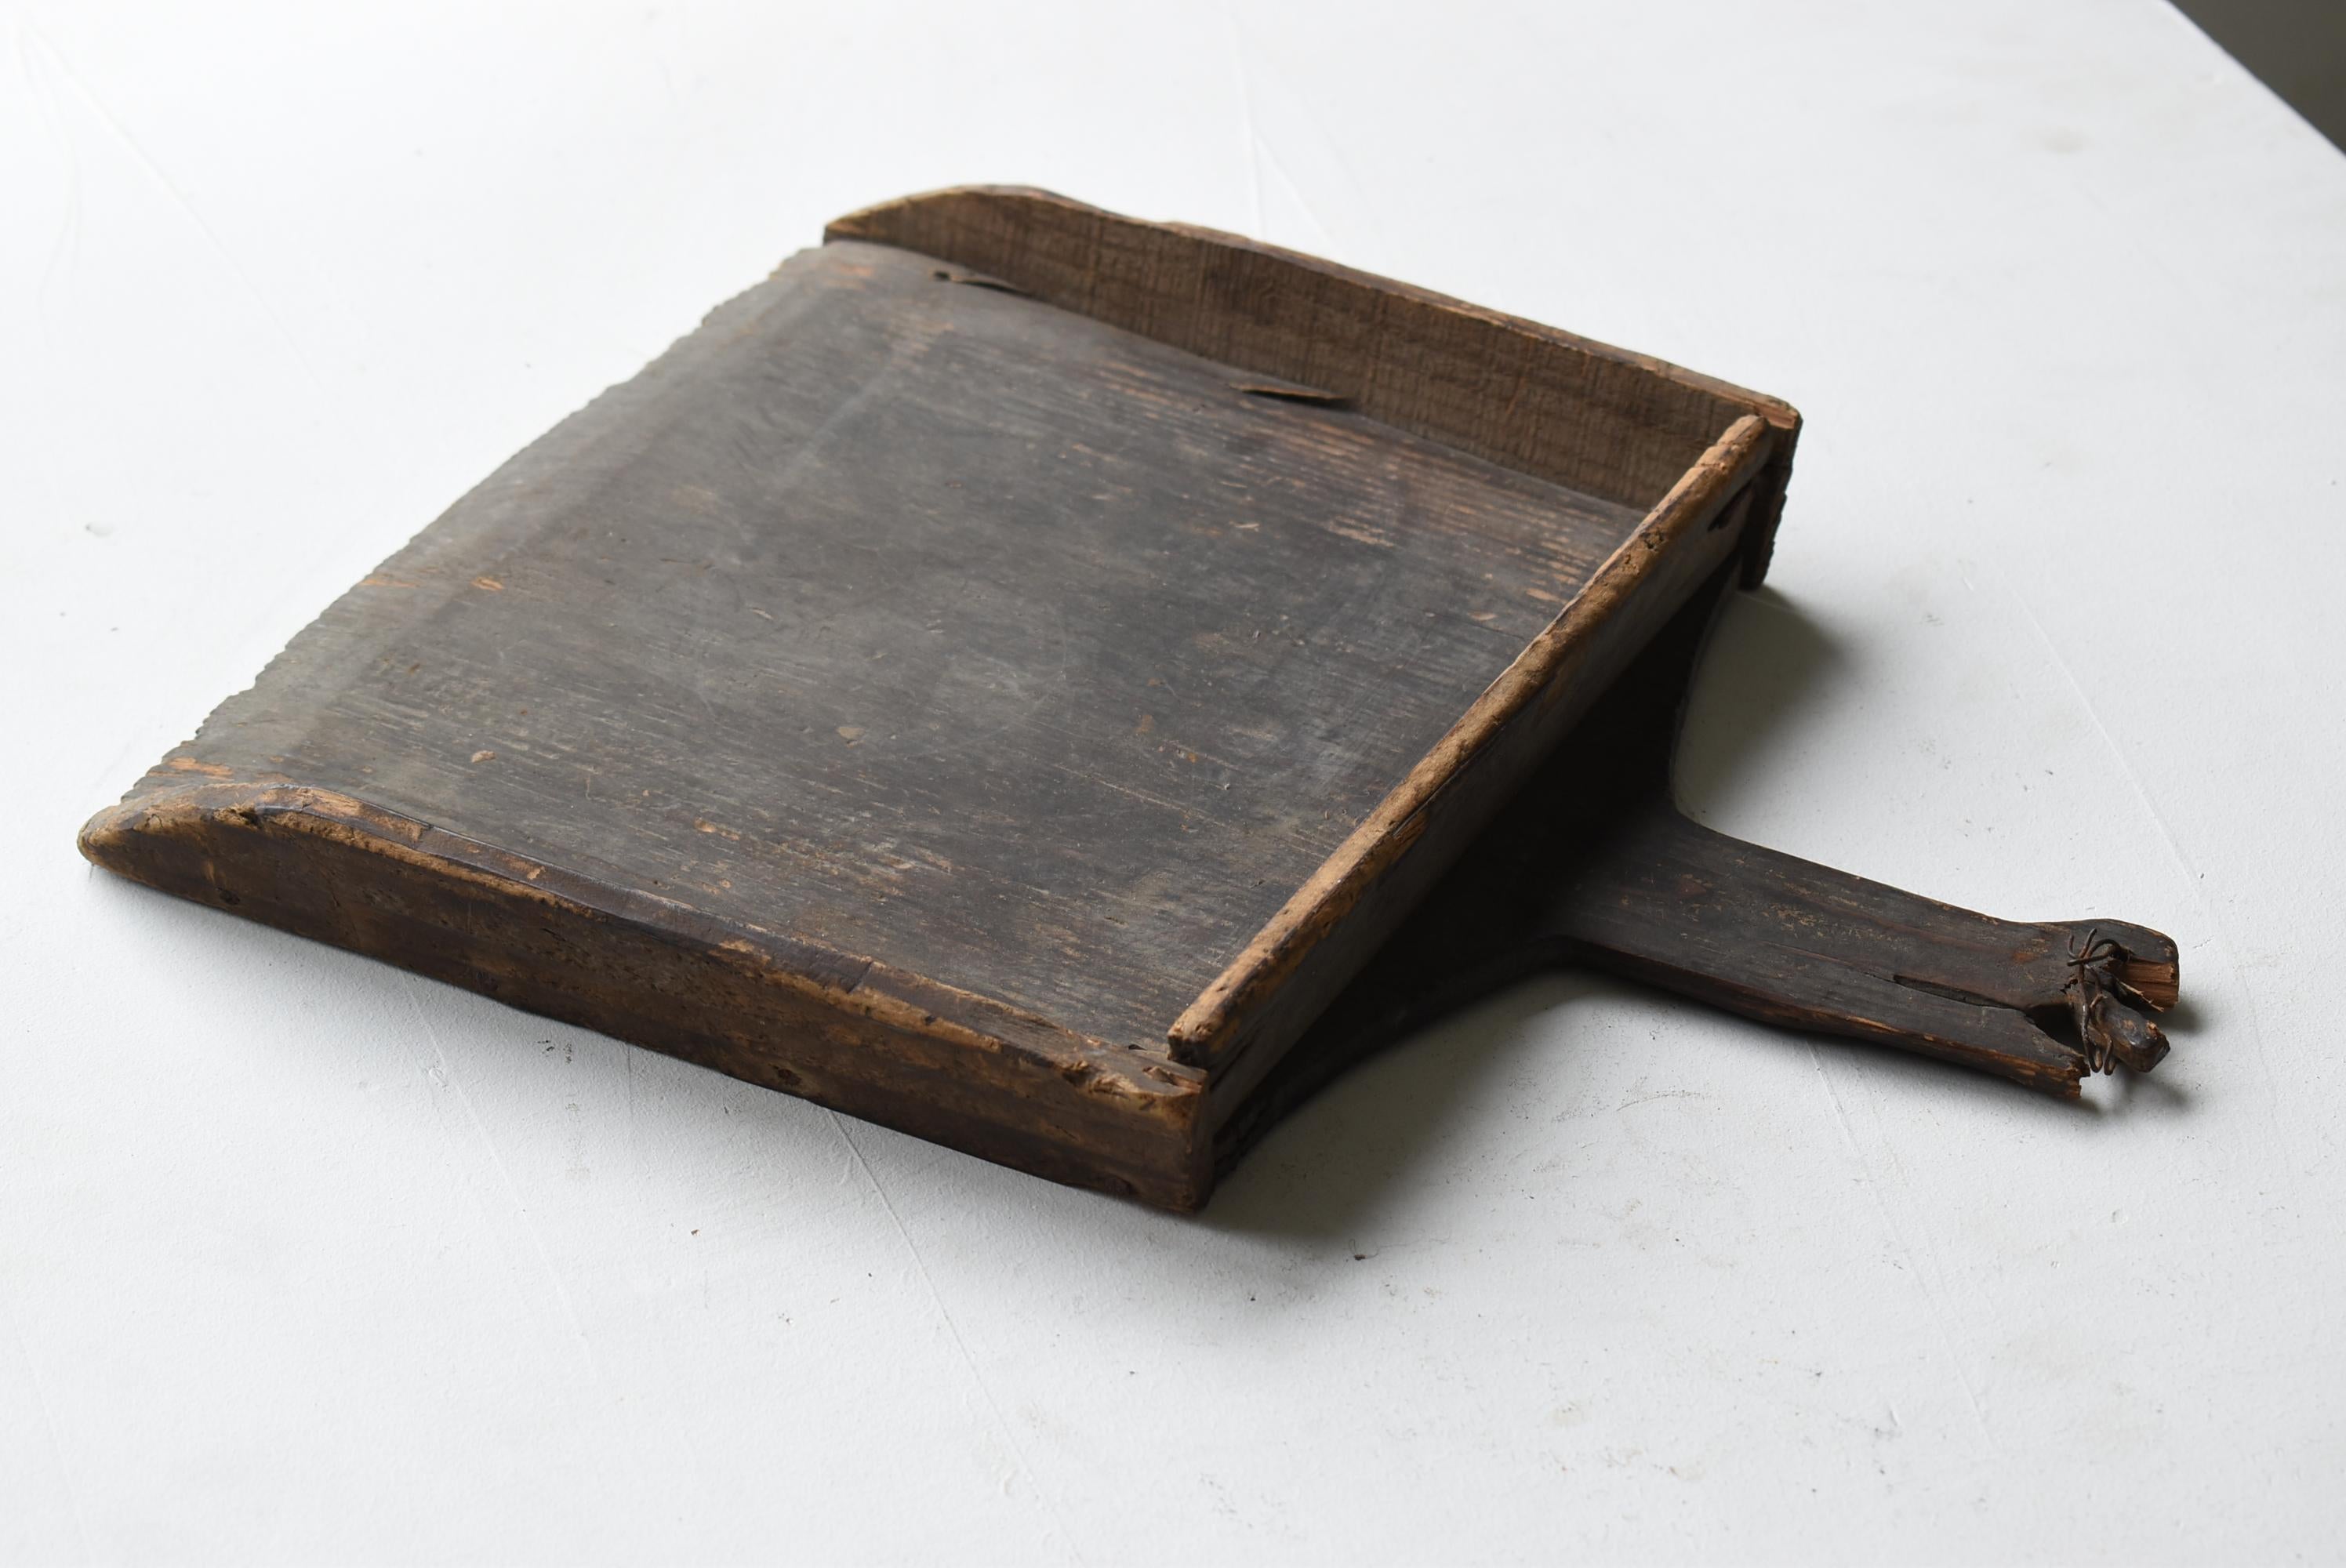 Early 20th Century Japanese Antique Wabi Sabi Art Dustpan 1910s-1920s / Object Contemporary Art For Sale